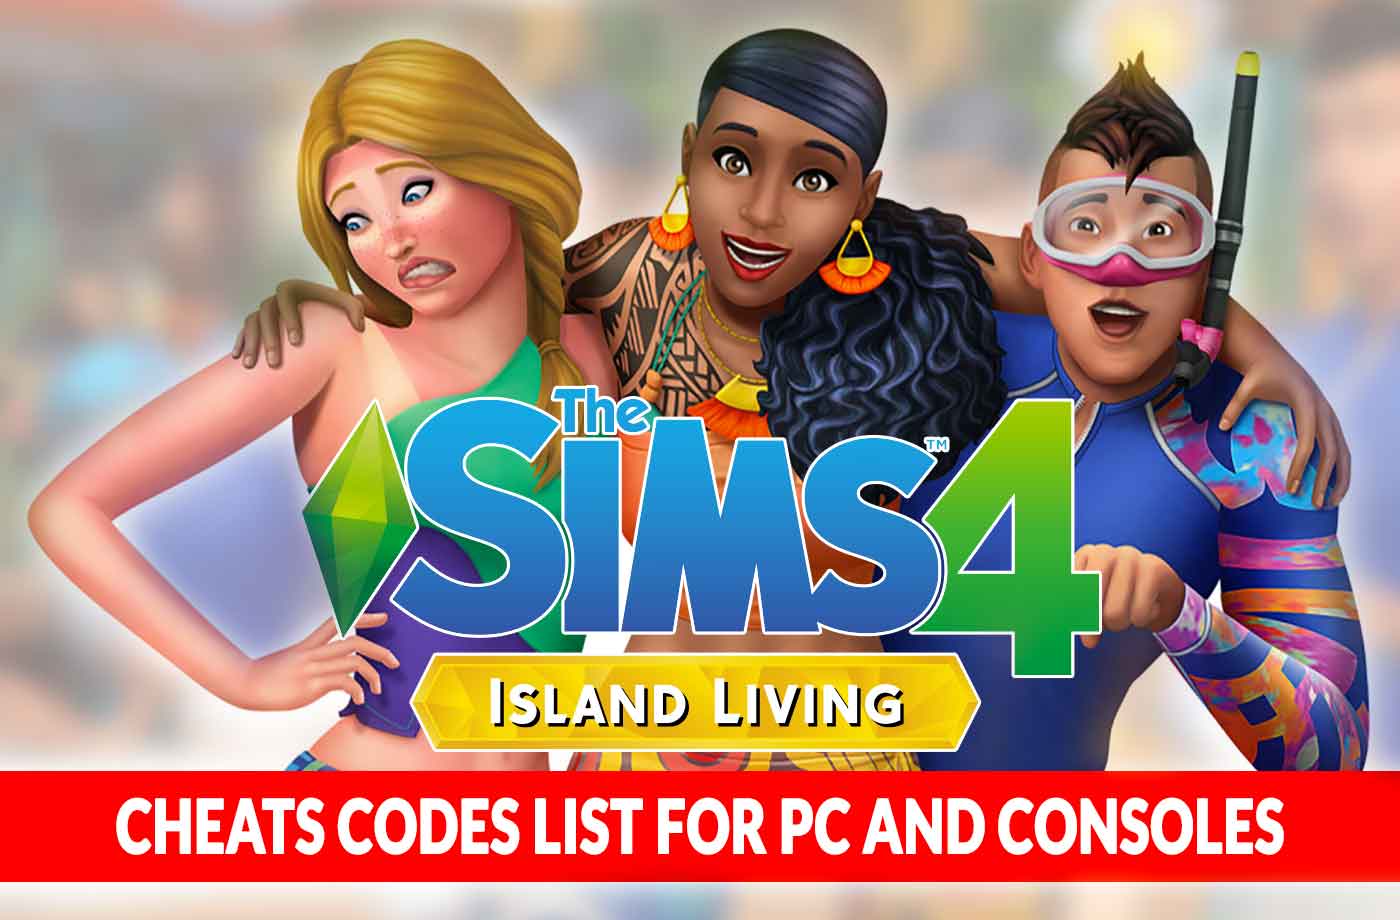 The Sims 4 Island Living Cheats Codes List For Pc And Consoles